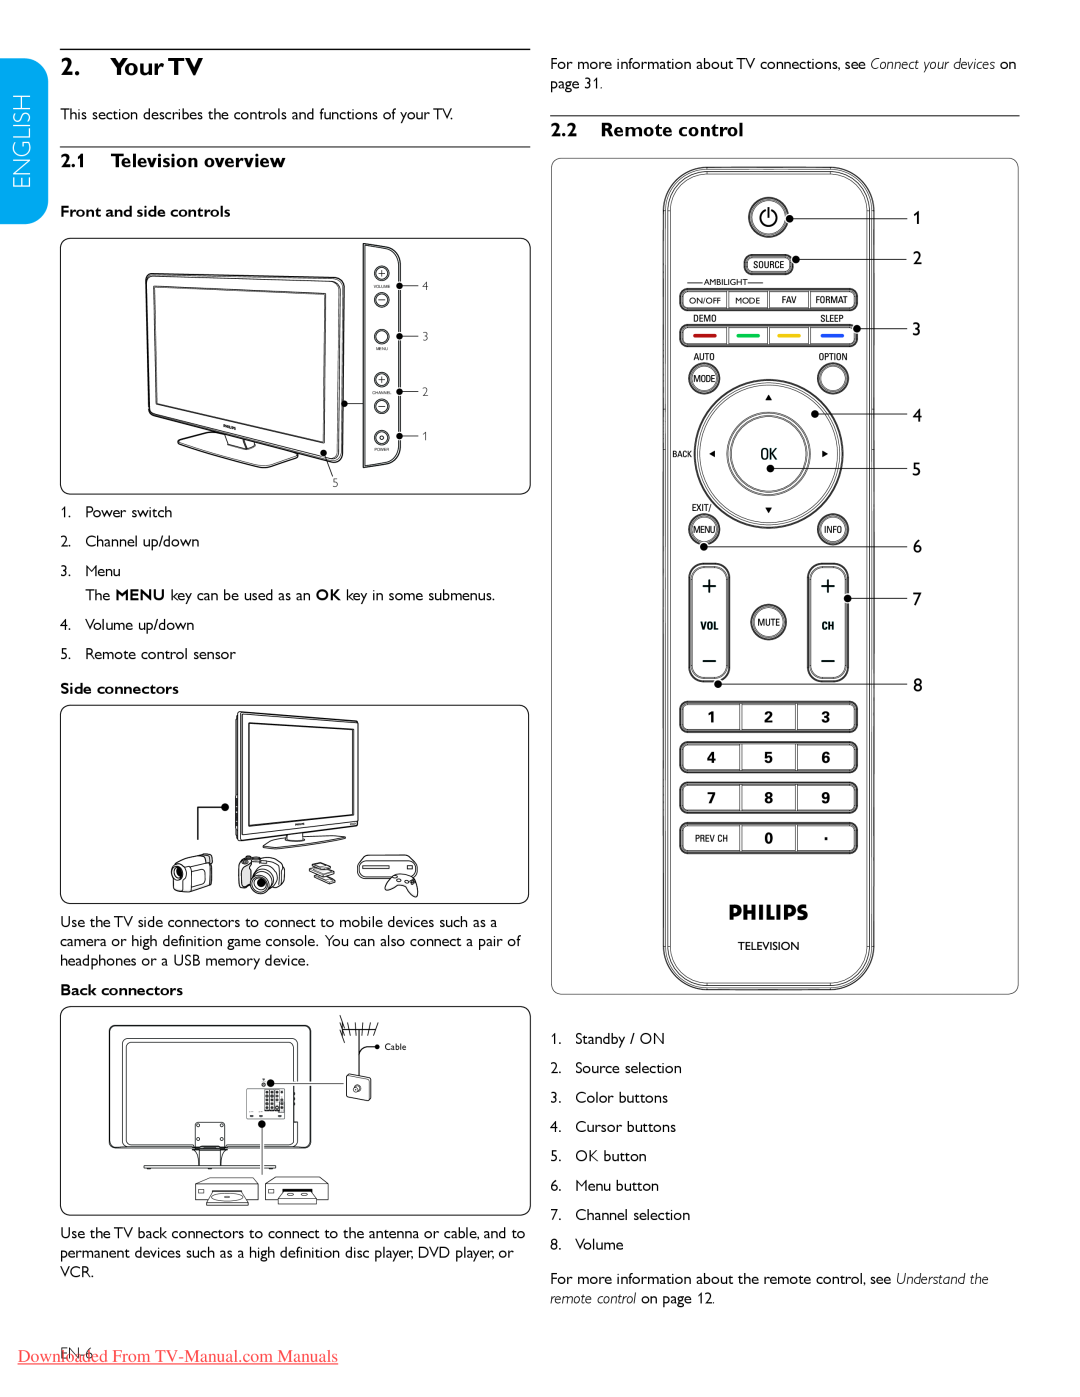 Philips 47PFL7603D Your TV, Television overview, Française, Remote control, Downloaded From TV-Manual.com Manuals 